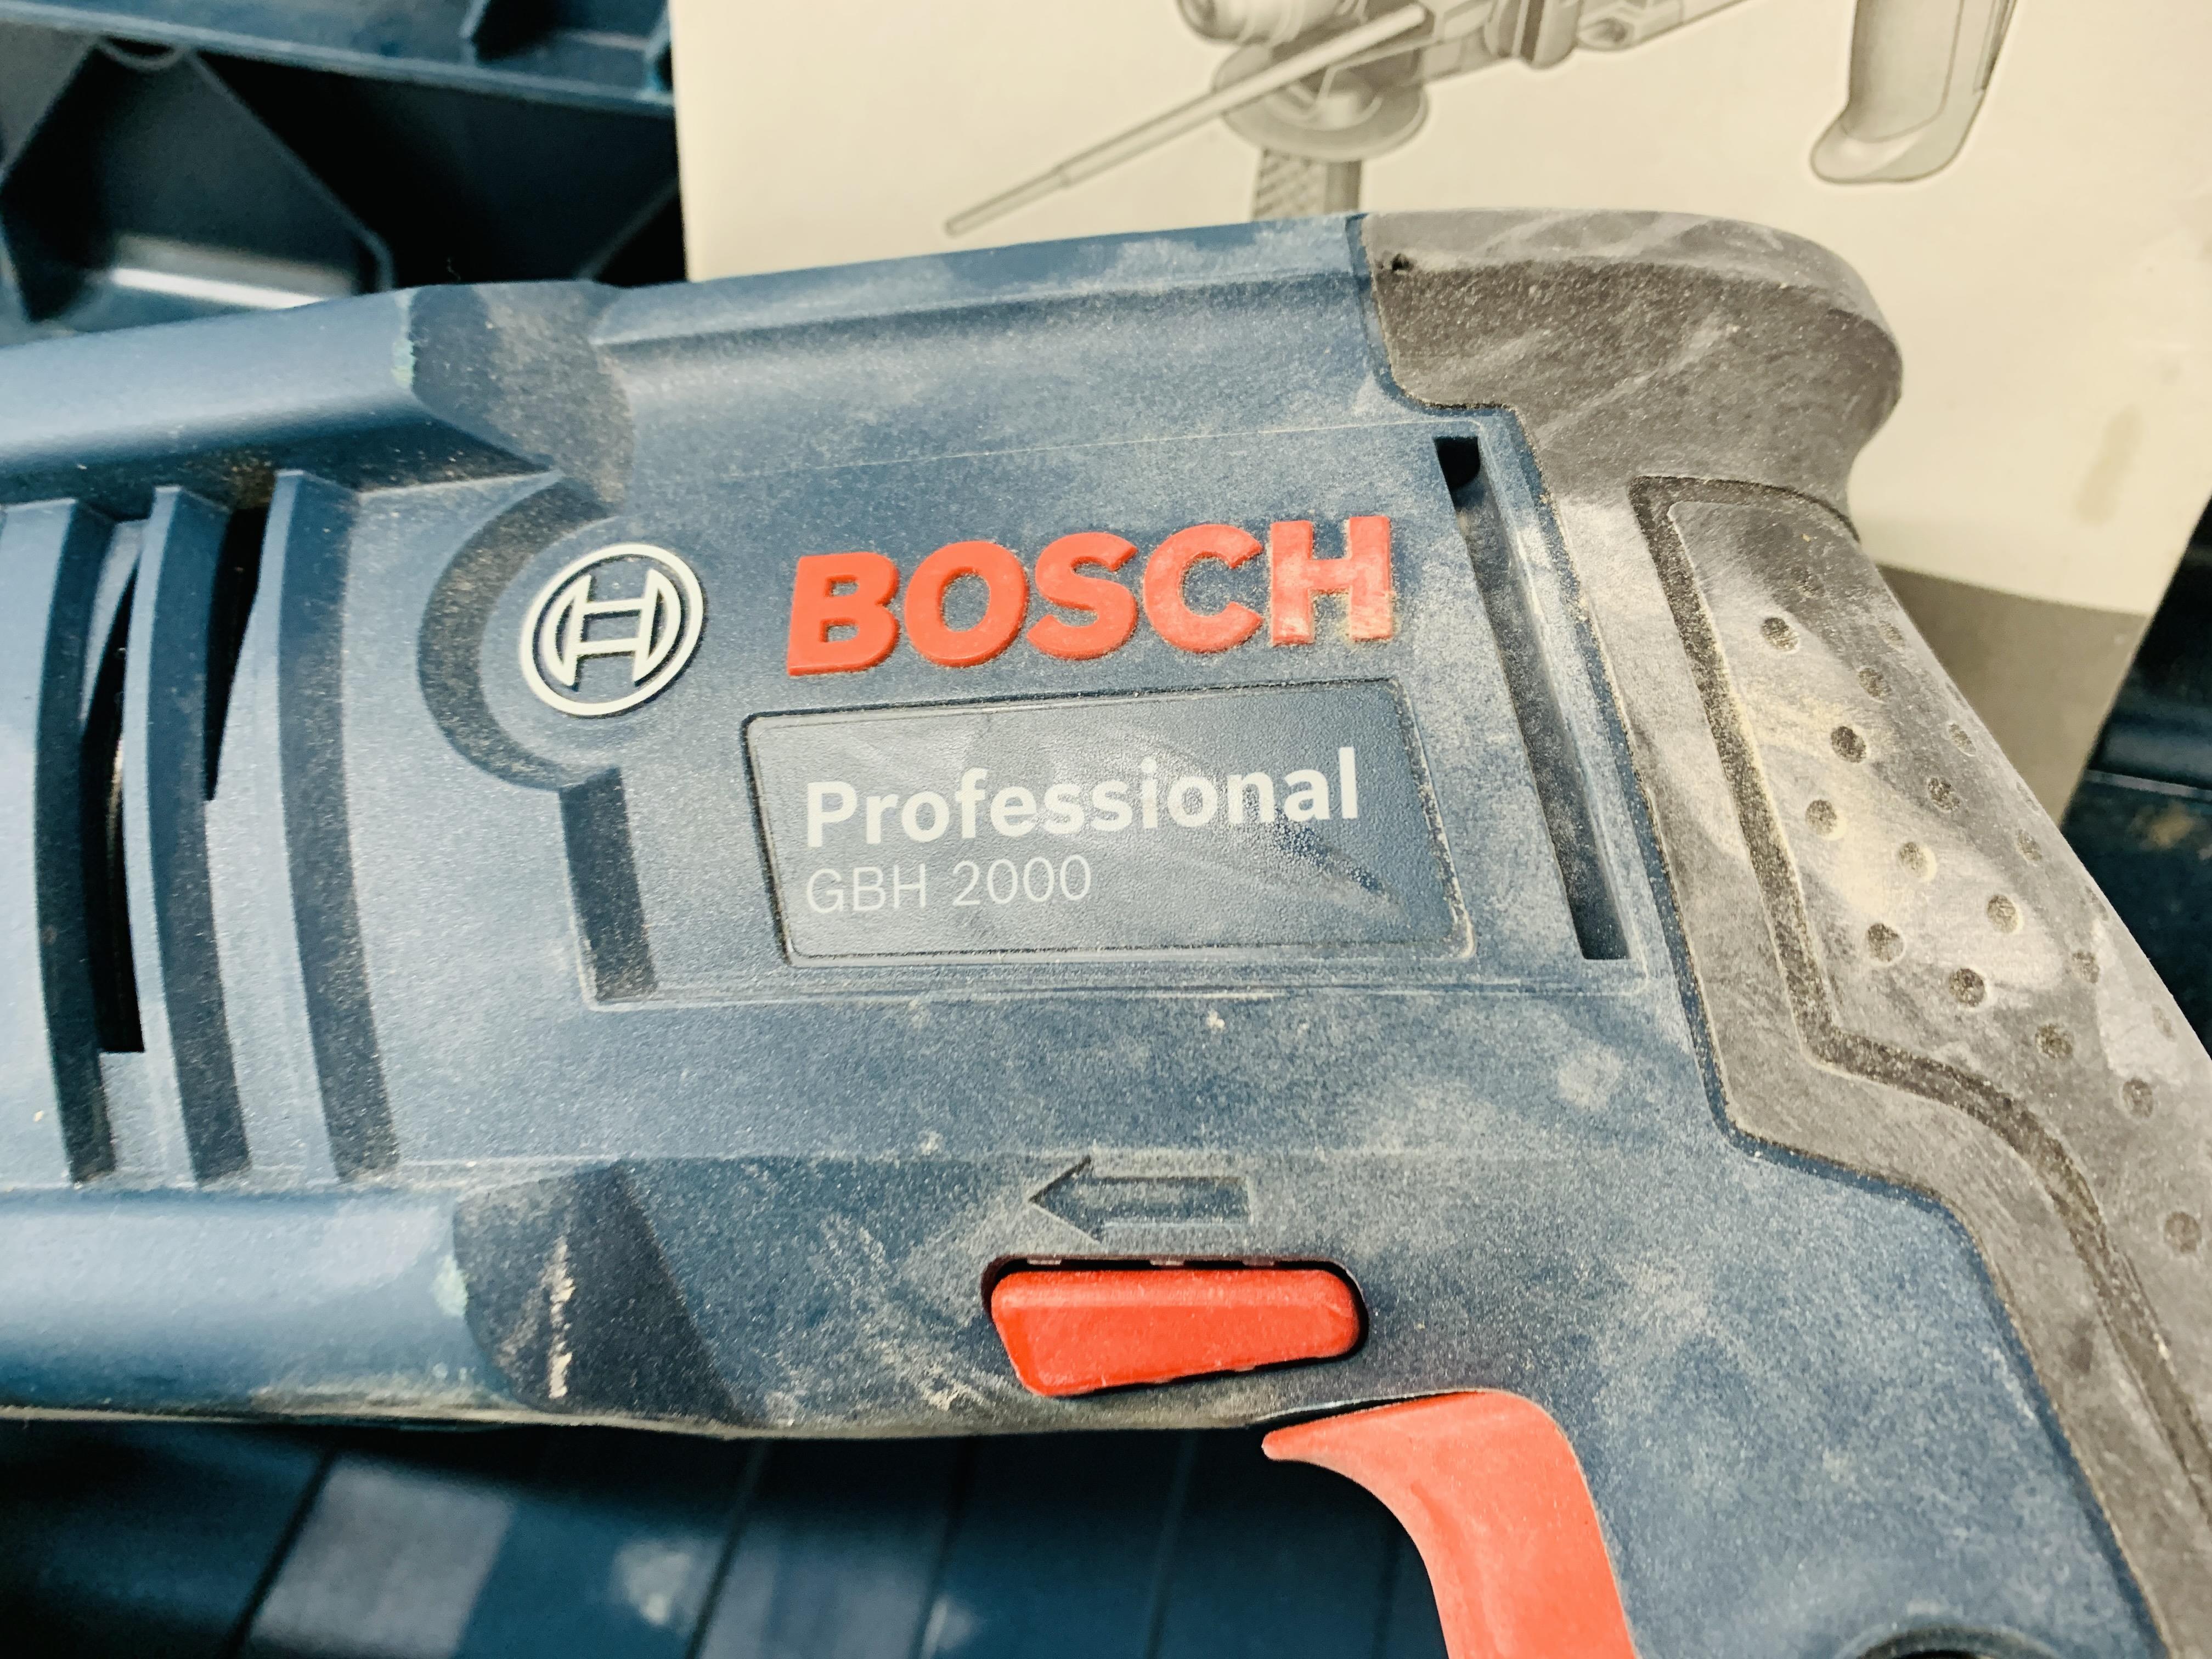 BOSCH PROFESSIONAL GBH 2000 110V HAMMER DRILL - SOLD AS SEEN - Image 3 of 6